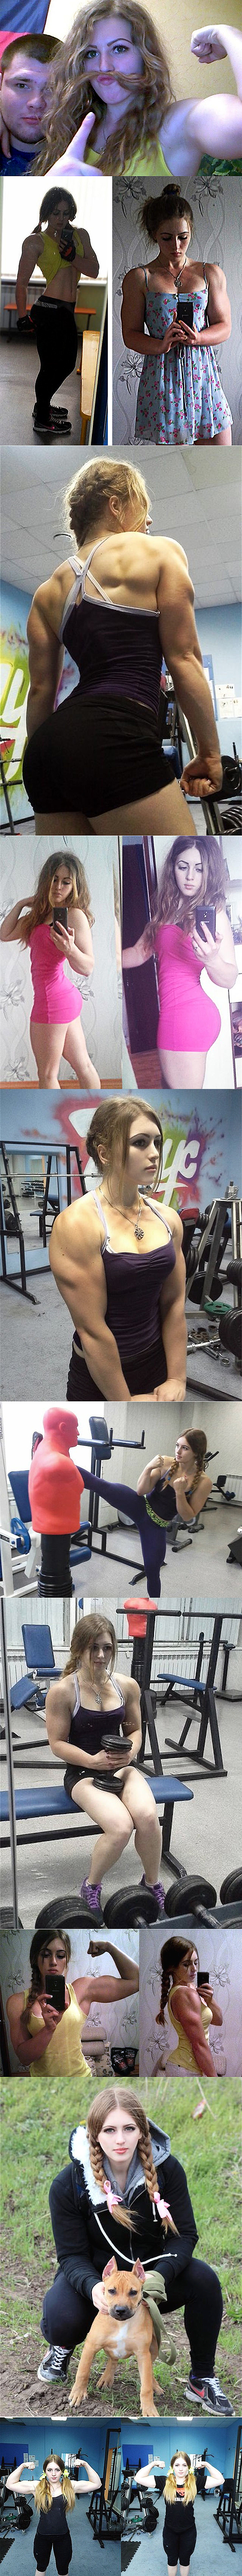 18-YEAR-OLD GIRL IS BUILT LIKE CONAN THE BARBARIAN